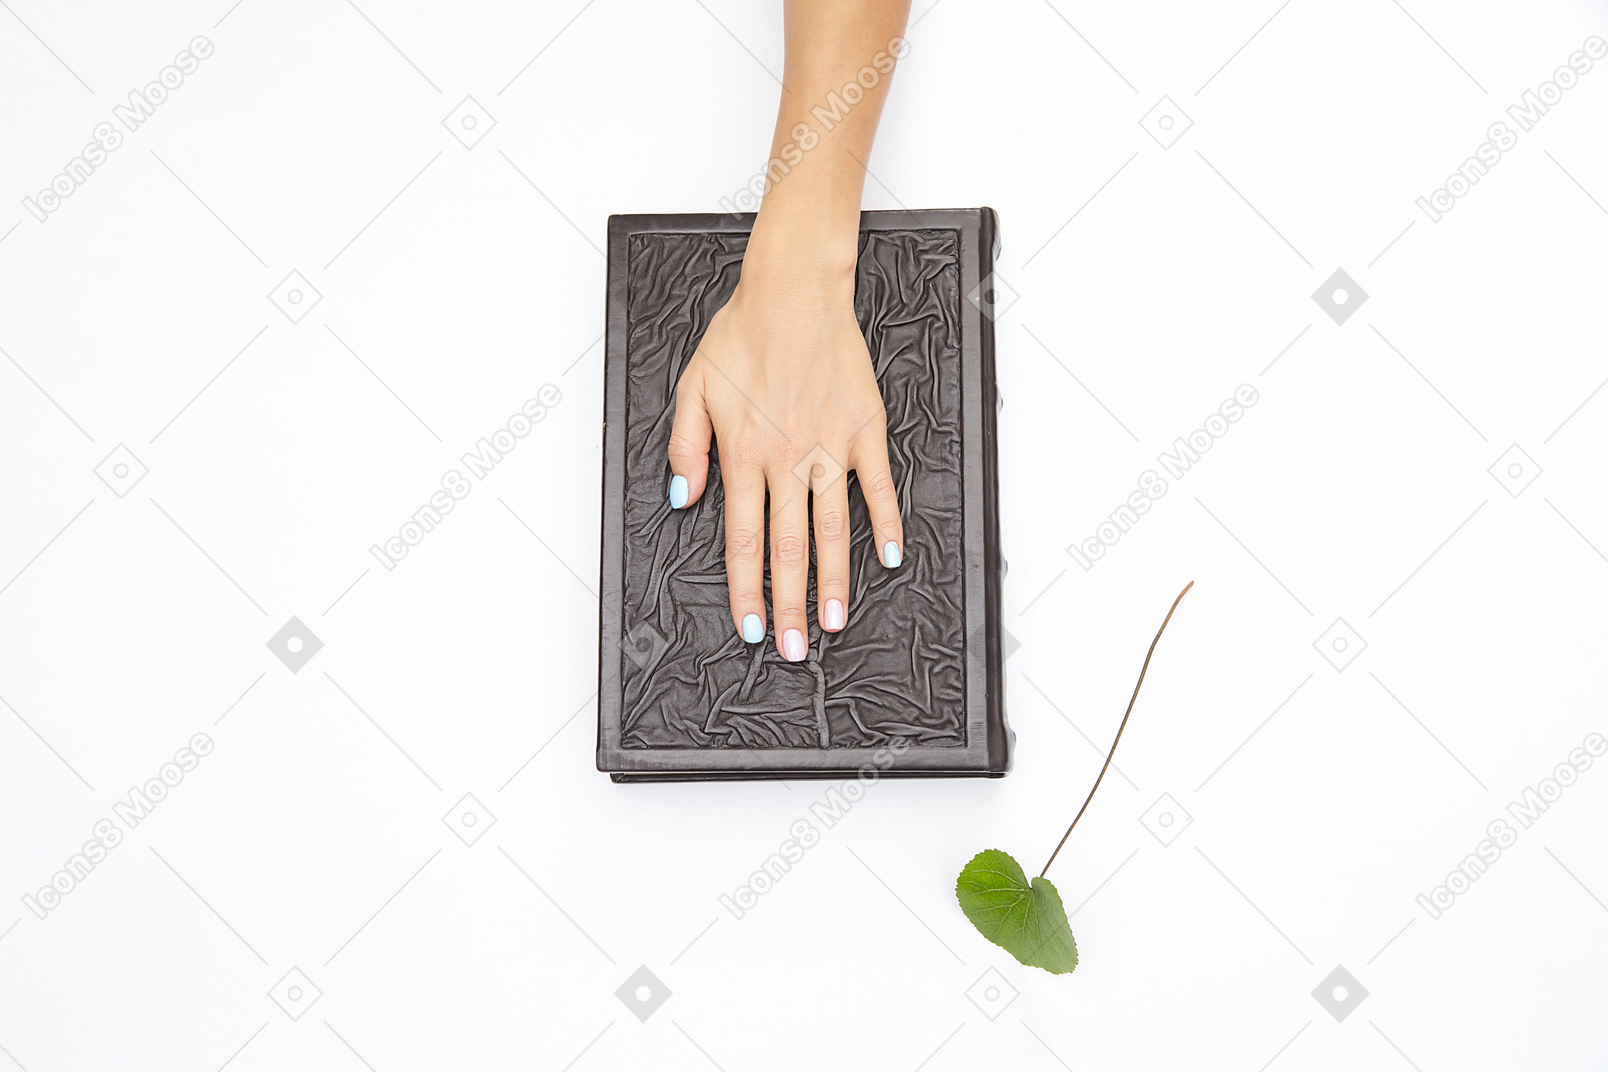 Black book and a green twig